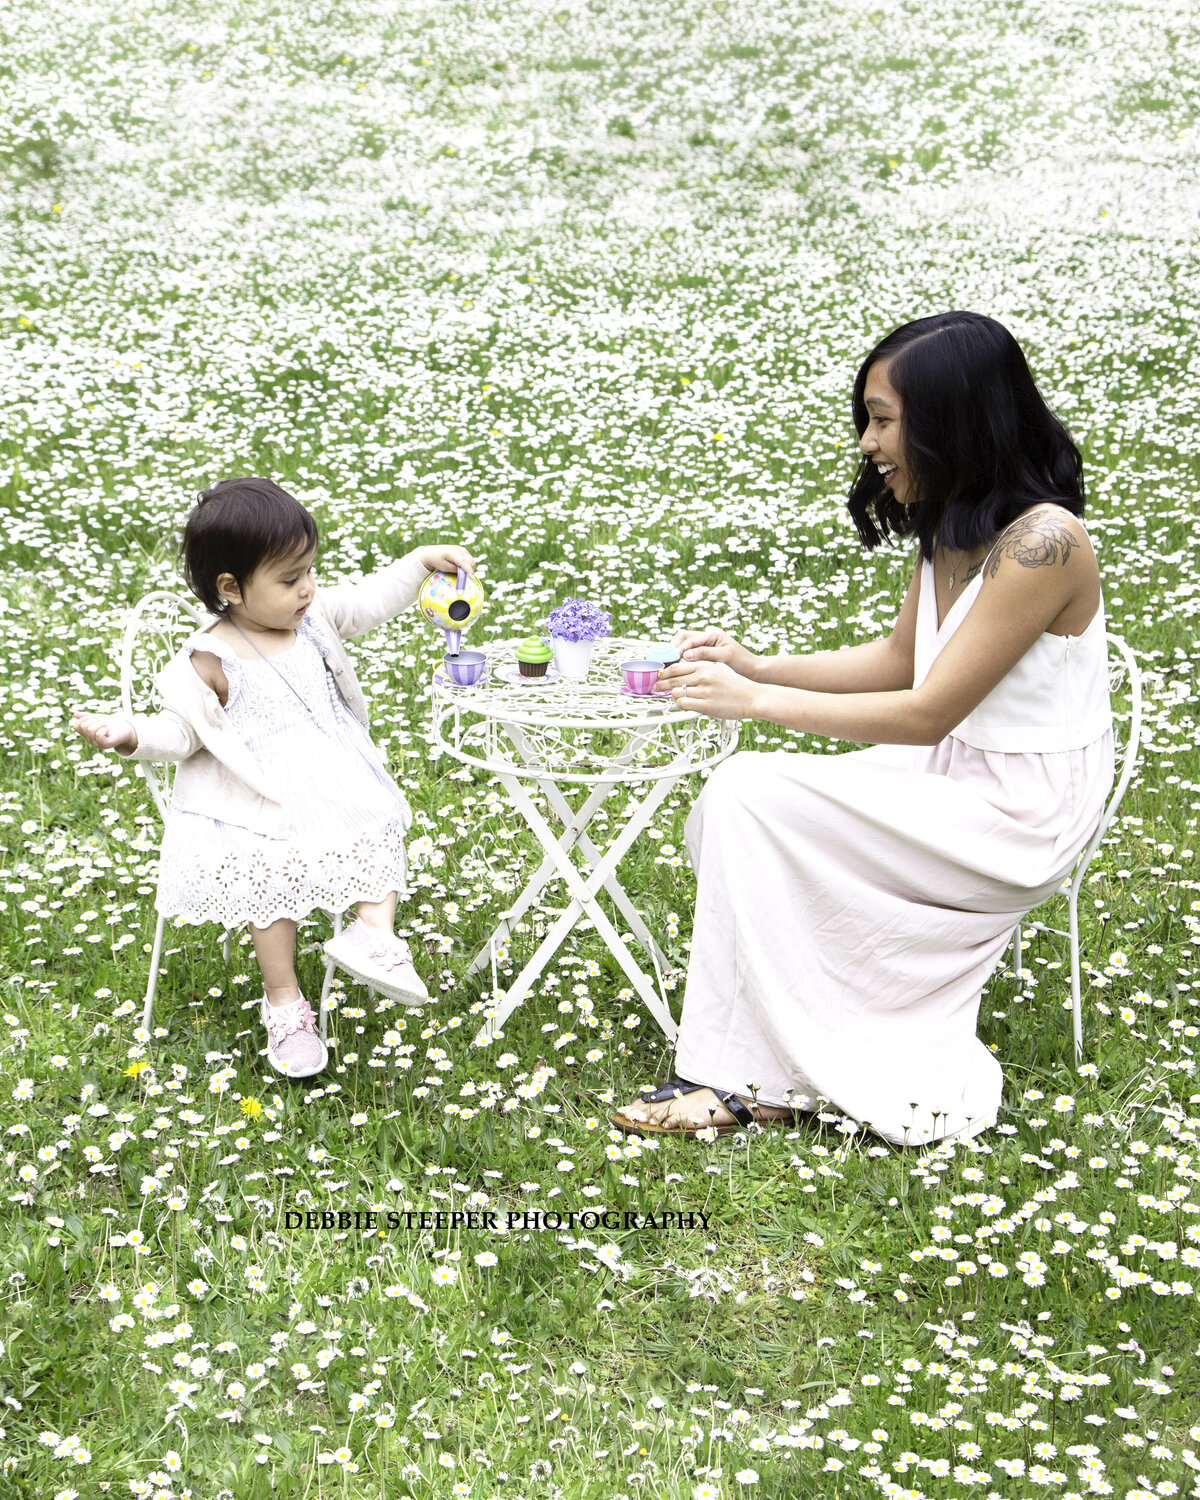 tea-party-with-mom-garden-daisies-mom-daughter-white-dresses-debbie-steeper-photography